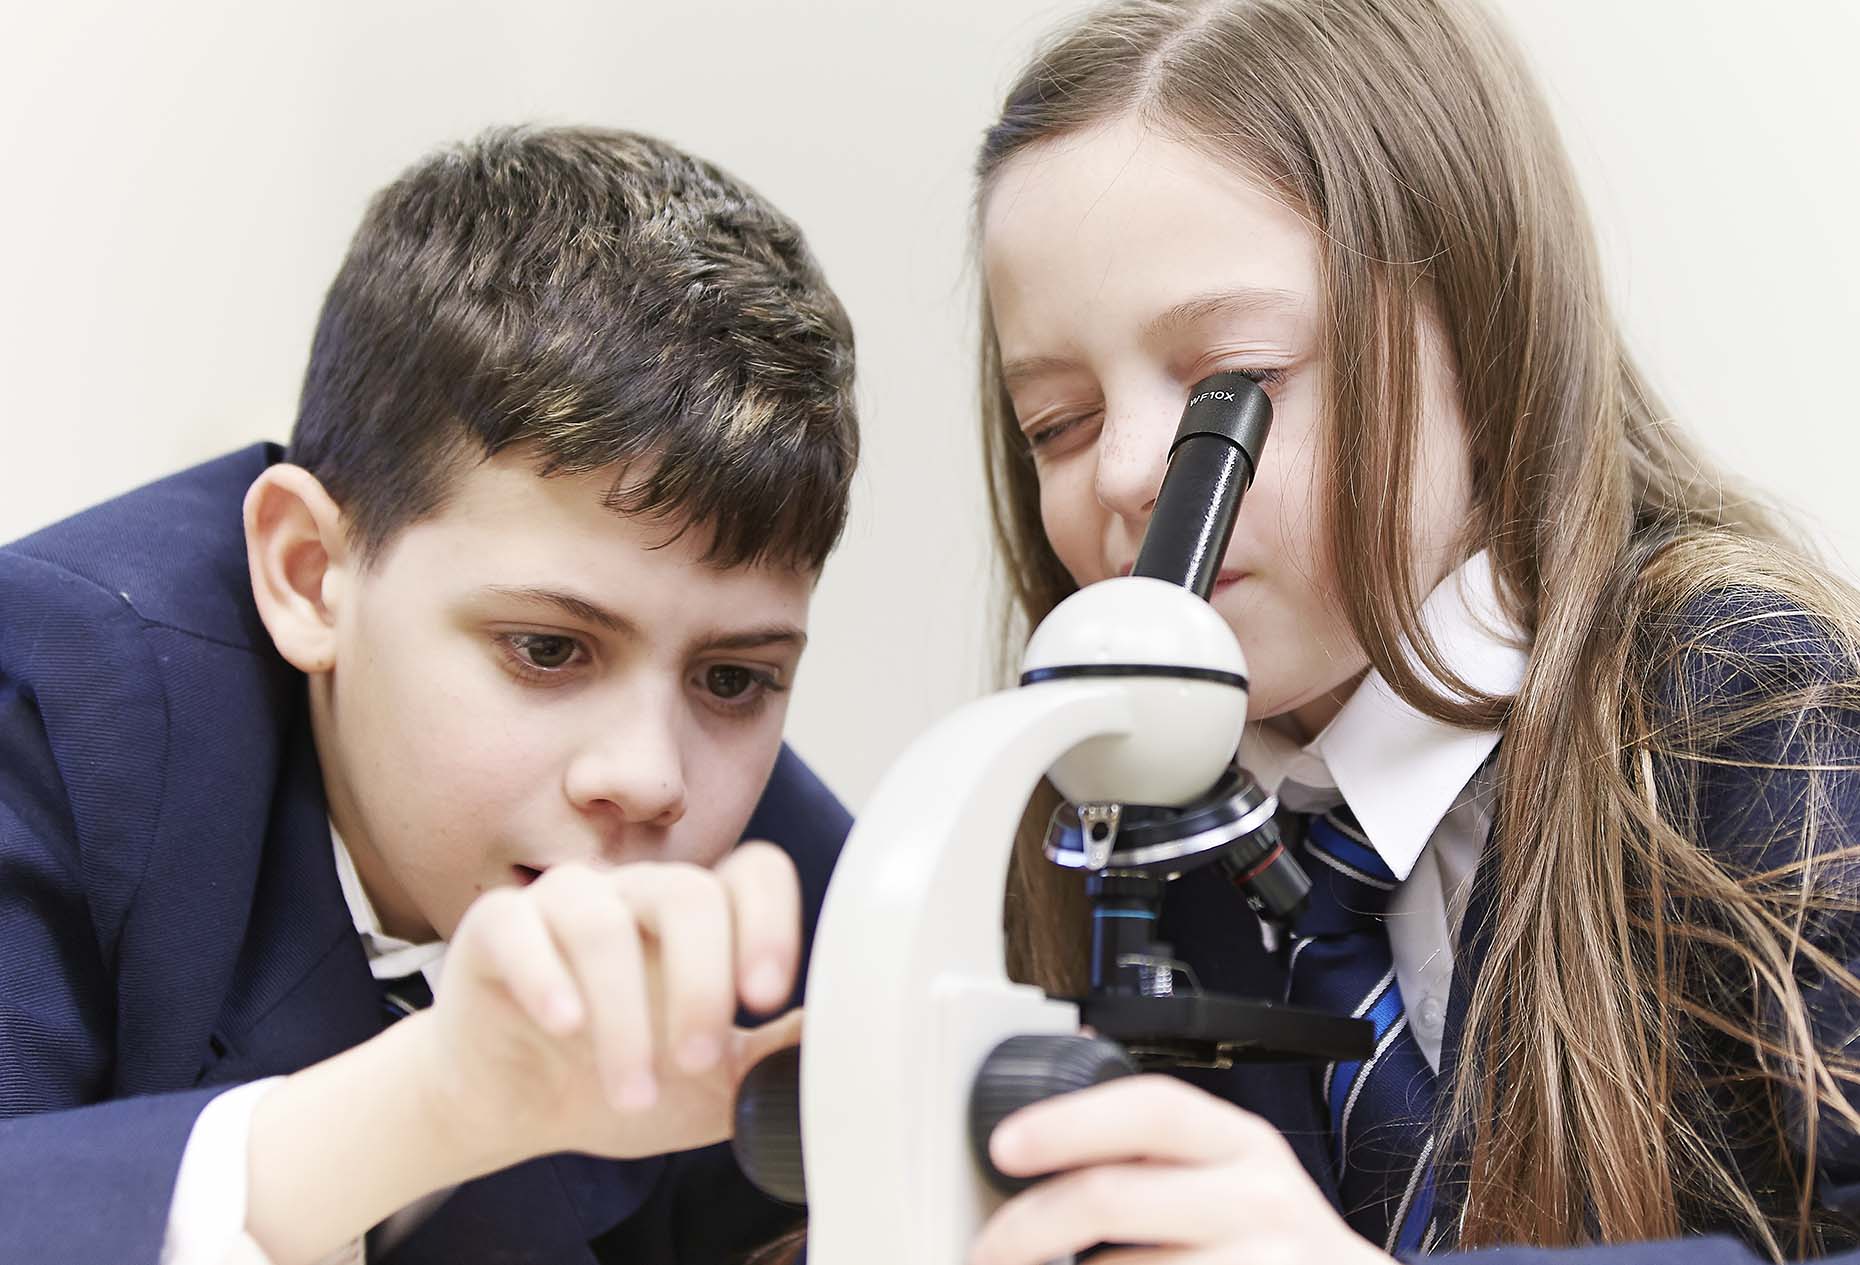 students learning using microscope